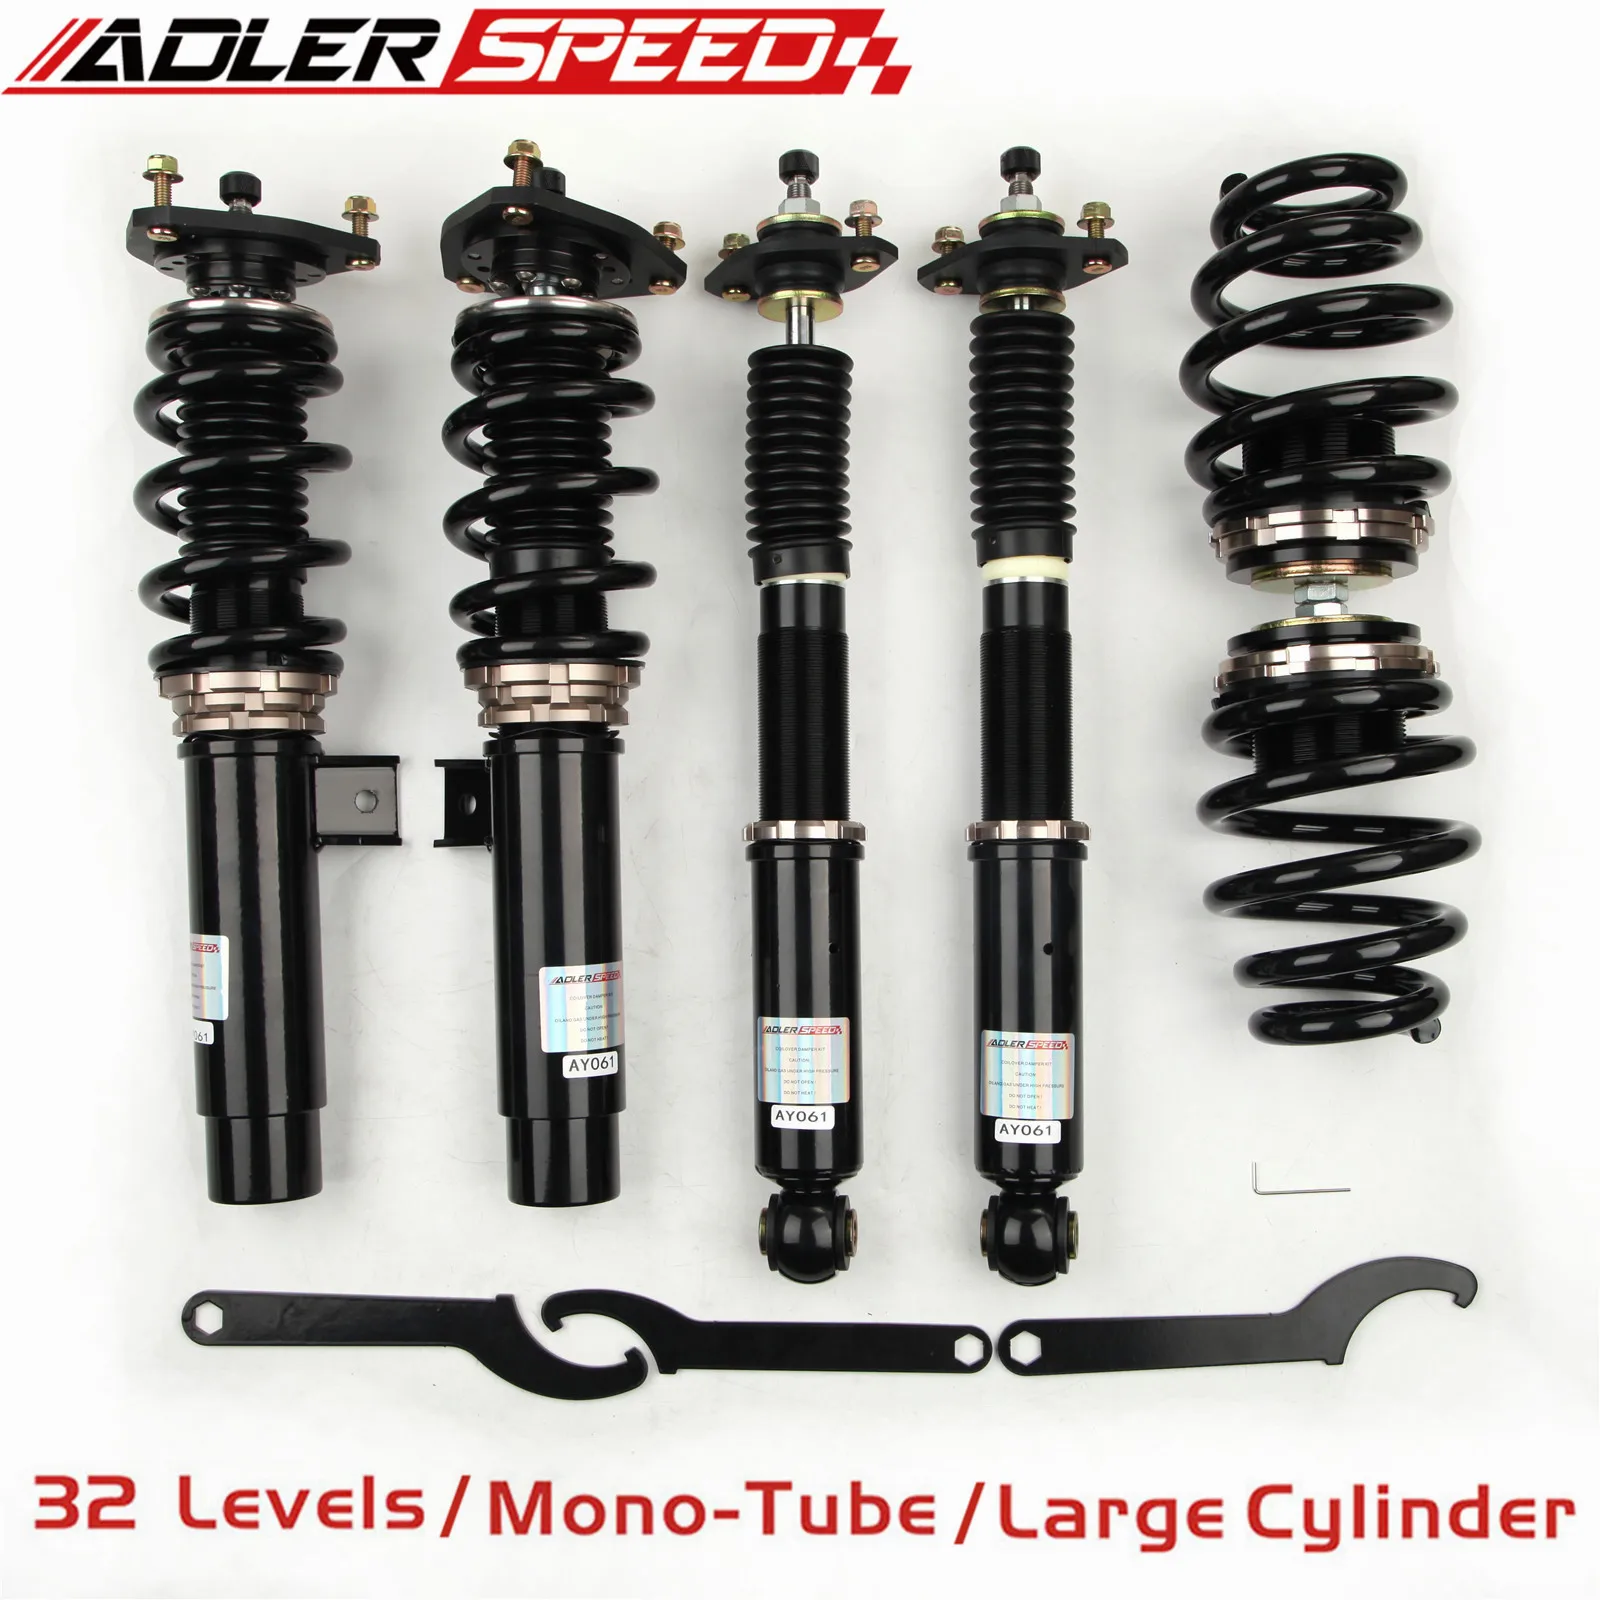 

ADLERSPEED 32 Way Damping Adjustable Coilovers Lowering Kit For BMW 3 Series E46 RWD 99-05